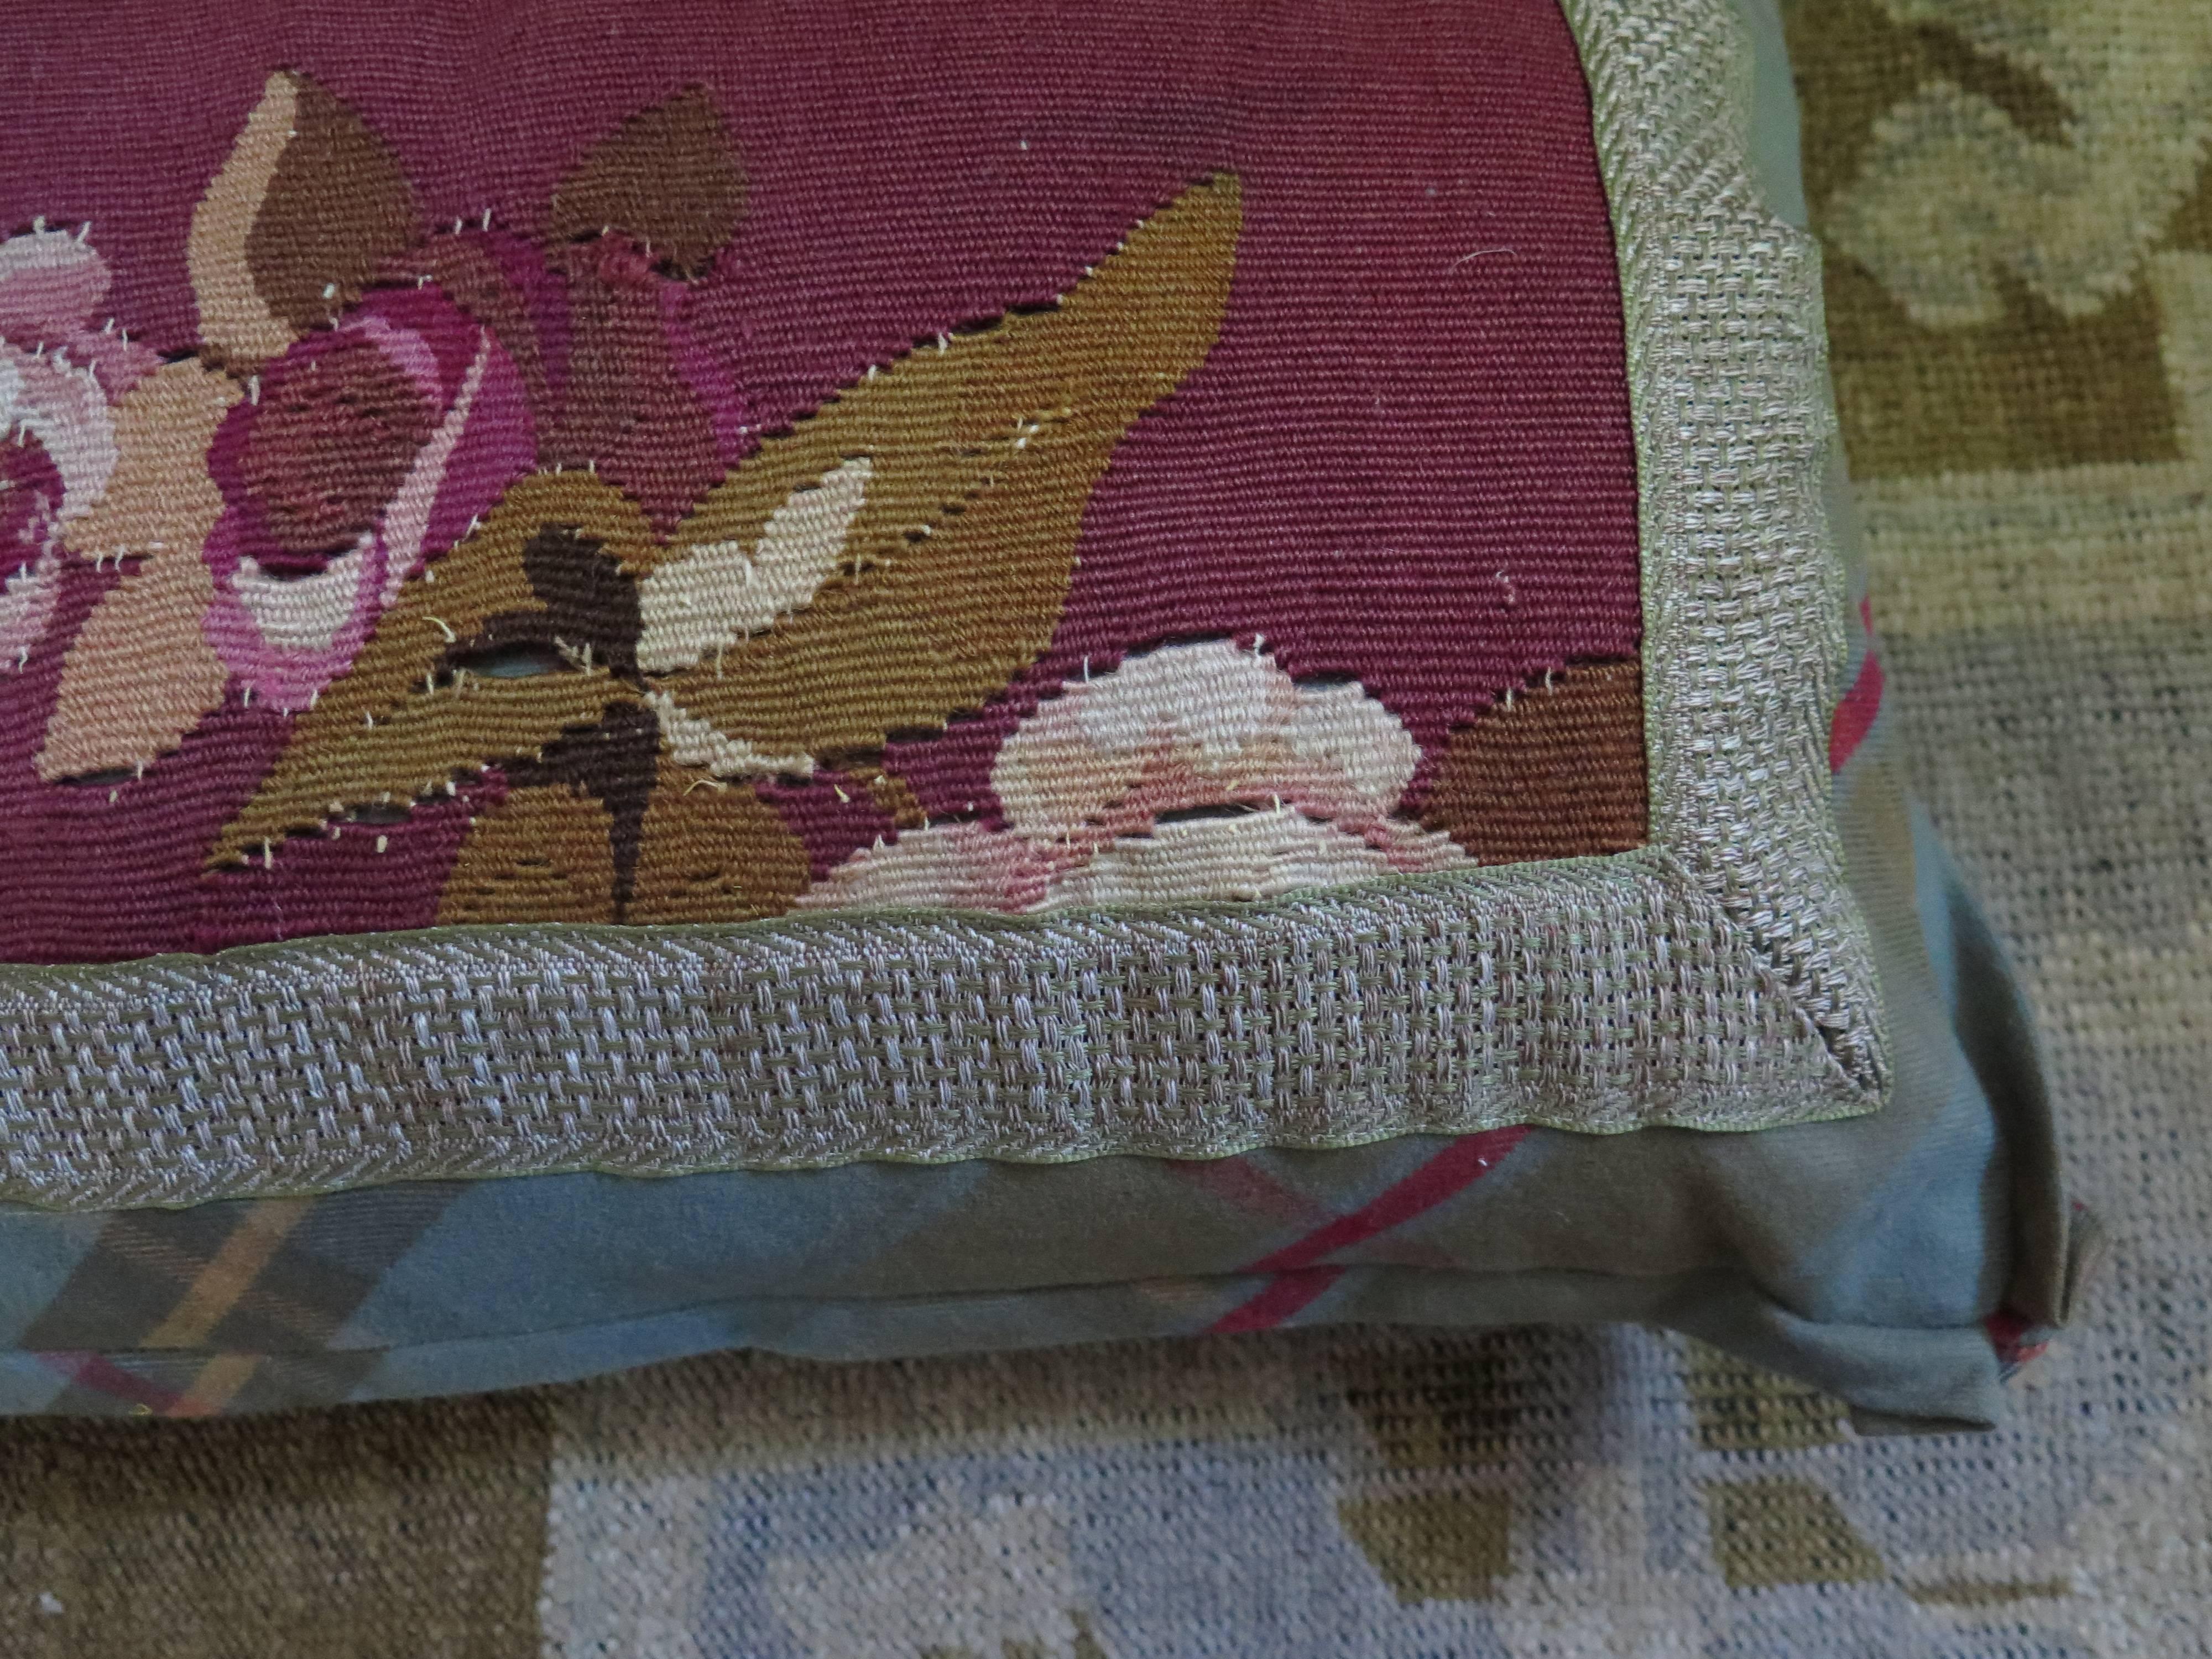 Pair of 19th century needlepoint pillows with lovely rose color and florals. Needlepoint is framed by plaid that has same rose color accent. Down filled.